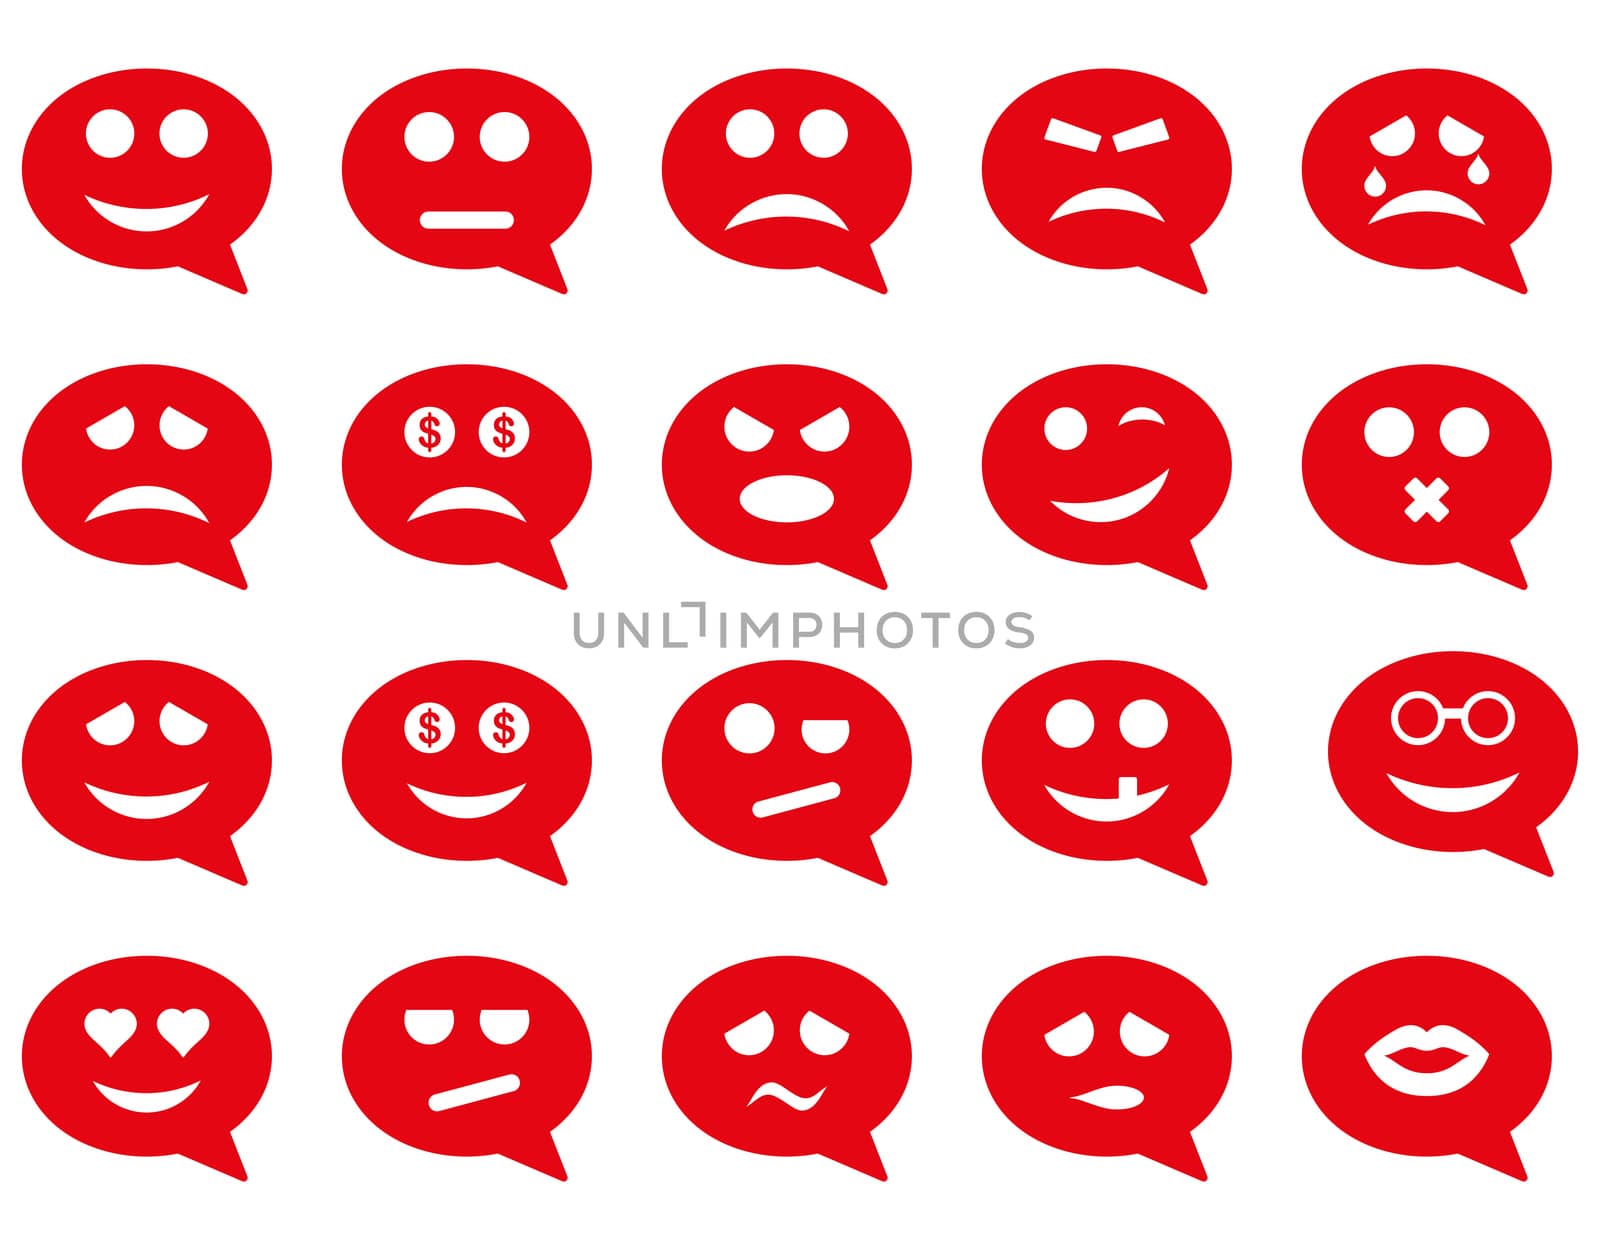 Chat emotion smile icons. Glyph set style is flat images, red symbols, isolated on a white background.